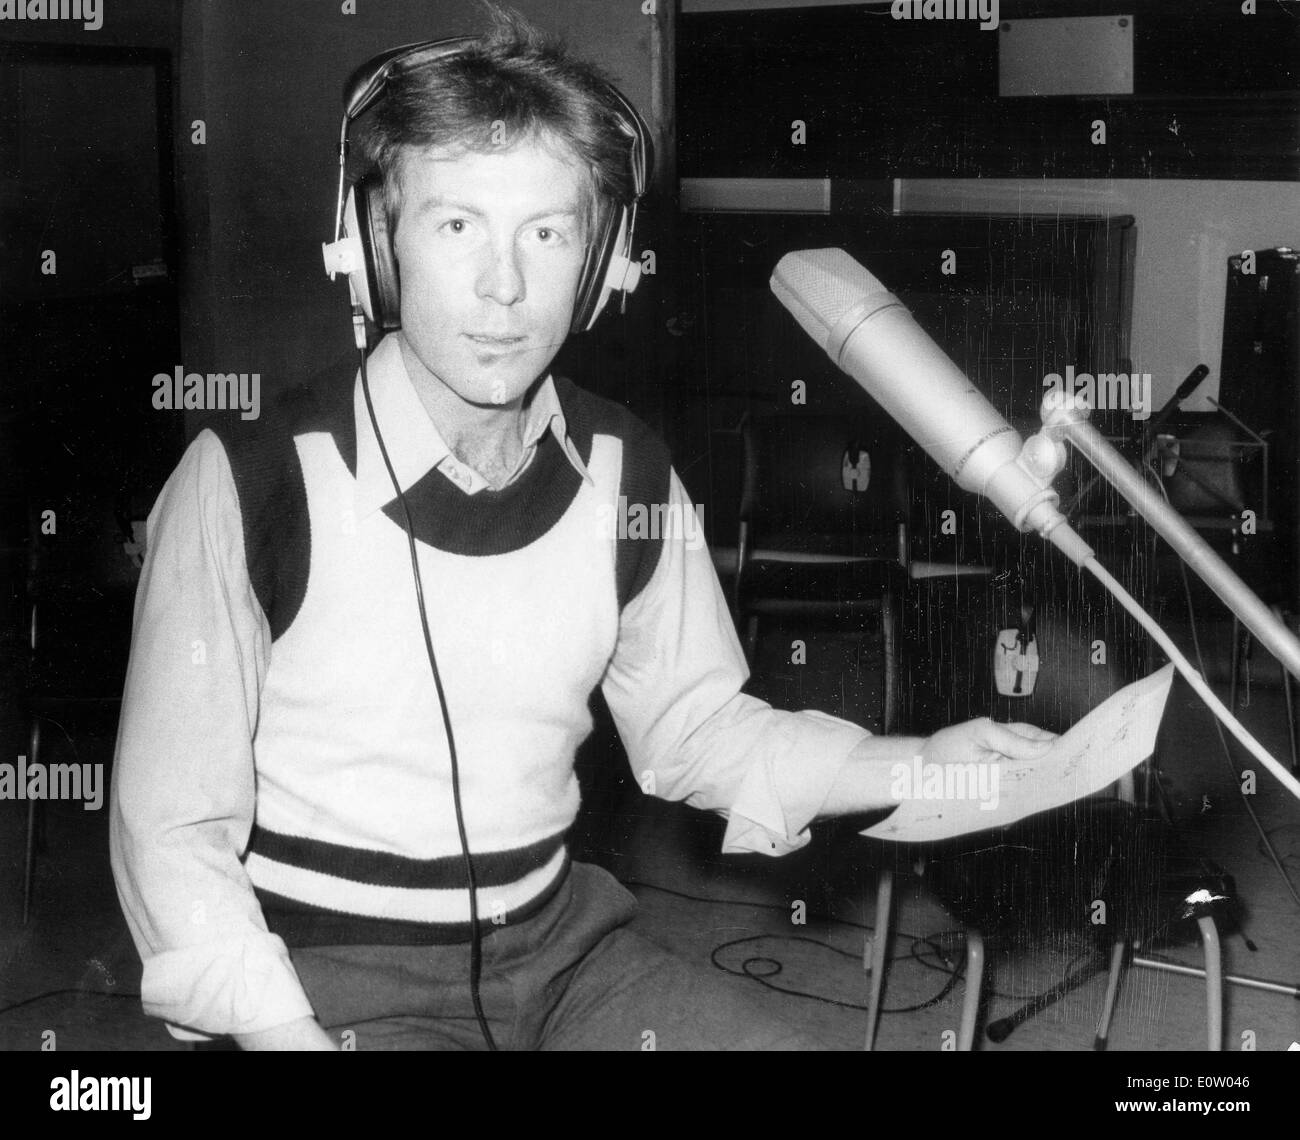 Roddy Llewellyn at the recording studio Stock Photo